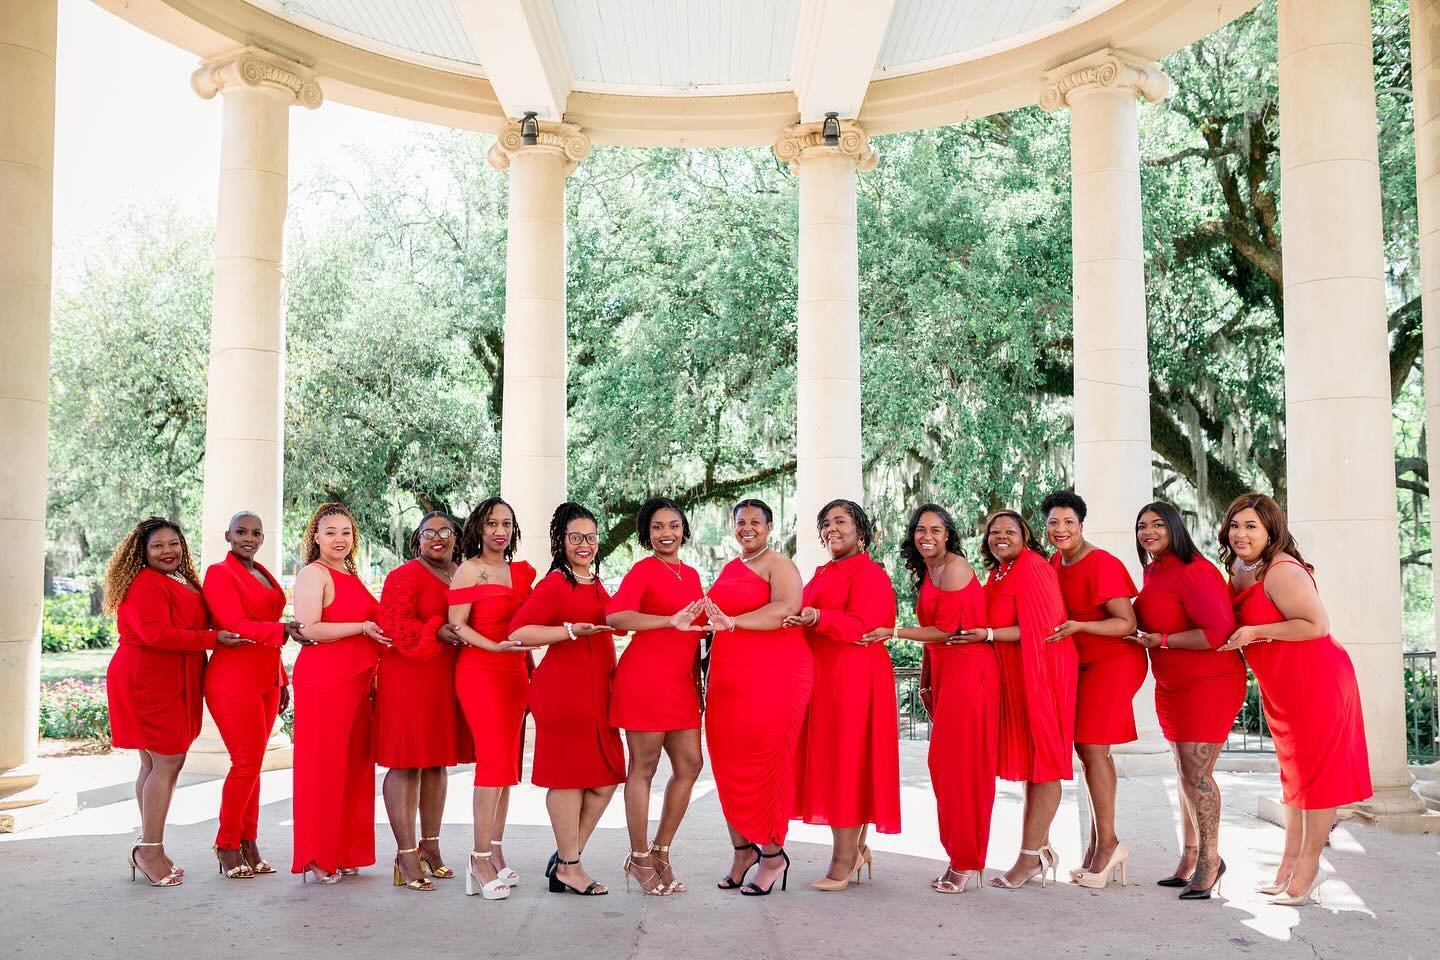 I had the most amazing opportunity to photograph the lovely ladies of #deltasigmatheta this week! 🐘 
It&rsquo;s their DeltaVersary! 
.
.
.
.
.
.
.
.
.
#neworleansphotographer #louisianaphotographer #visitneworleans #onetimeinneworleans #deltasigmath